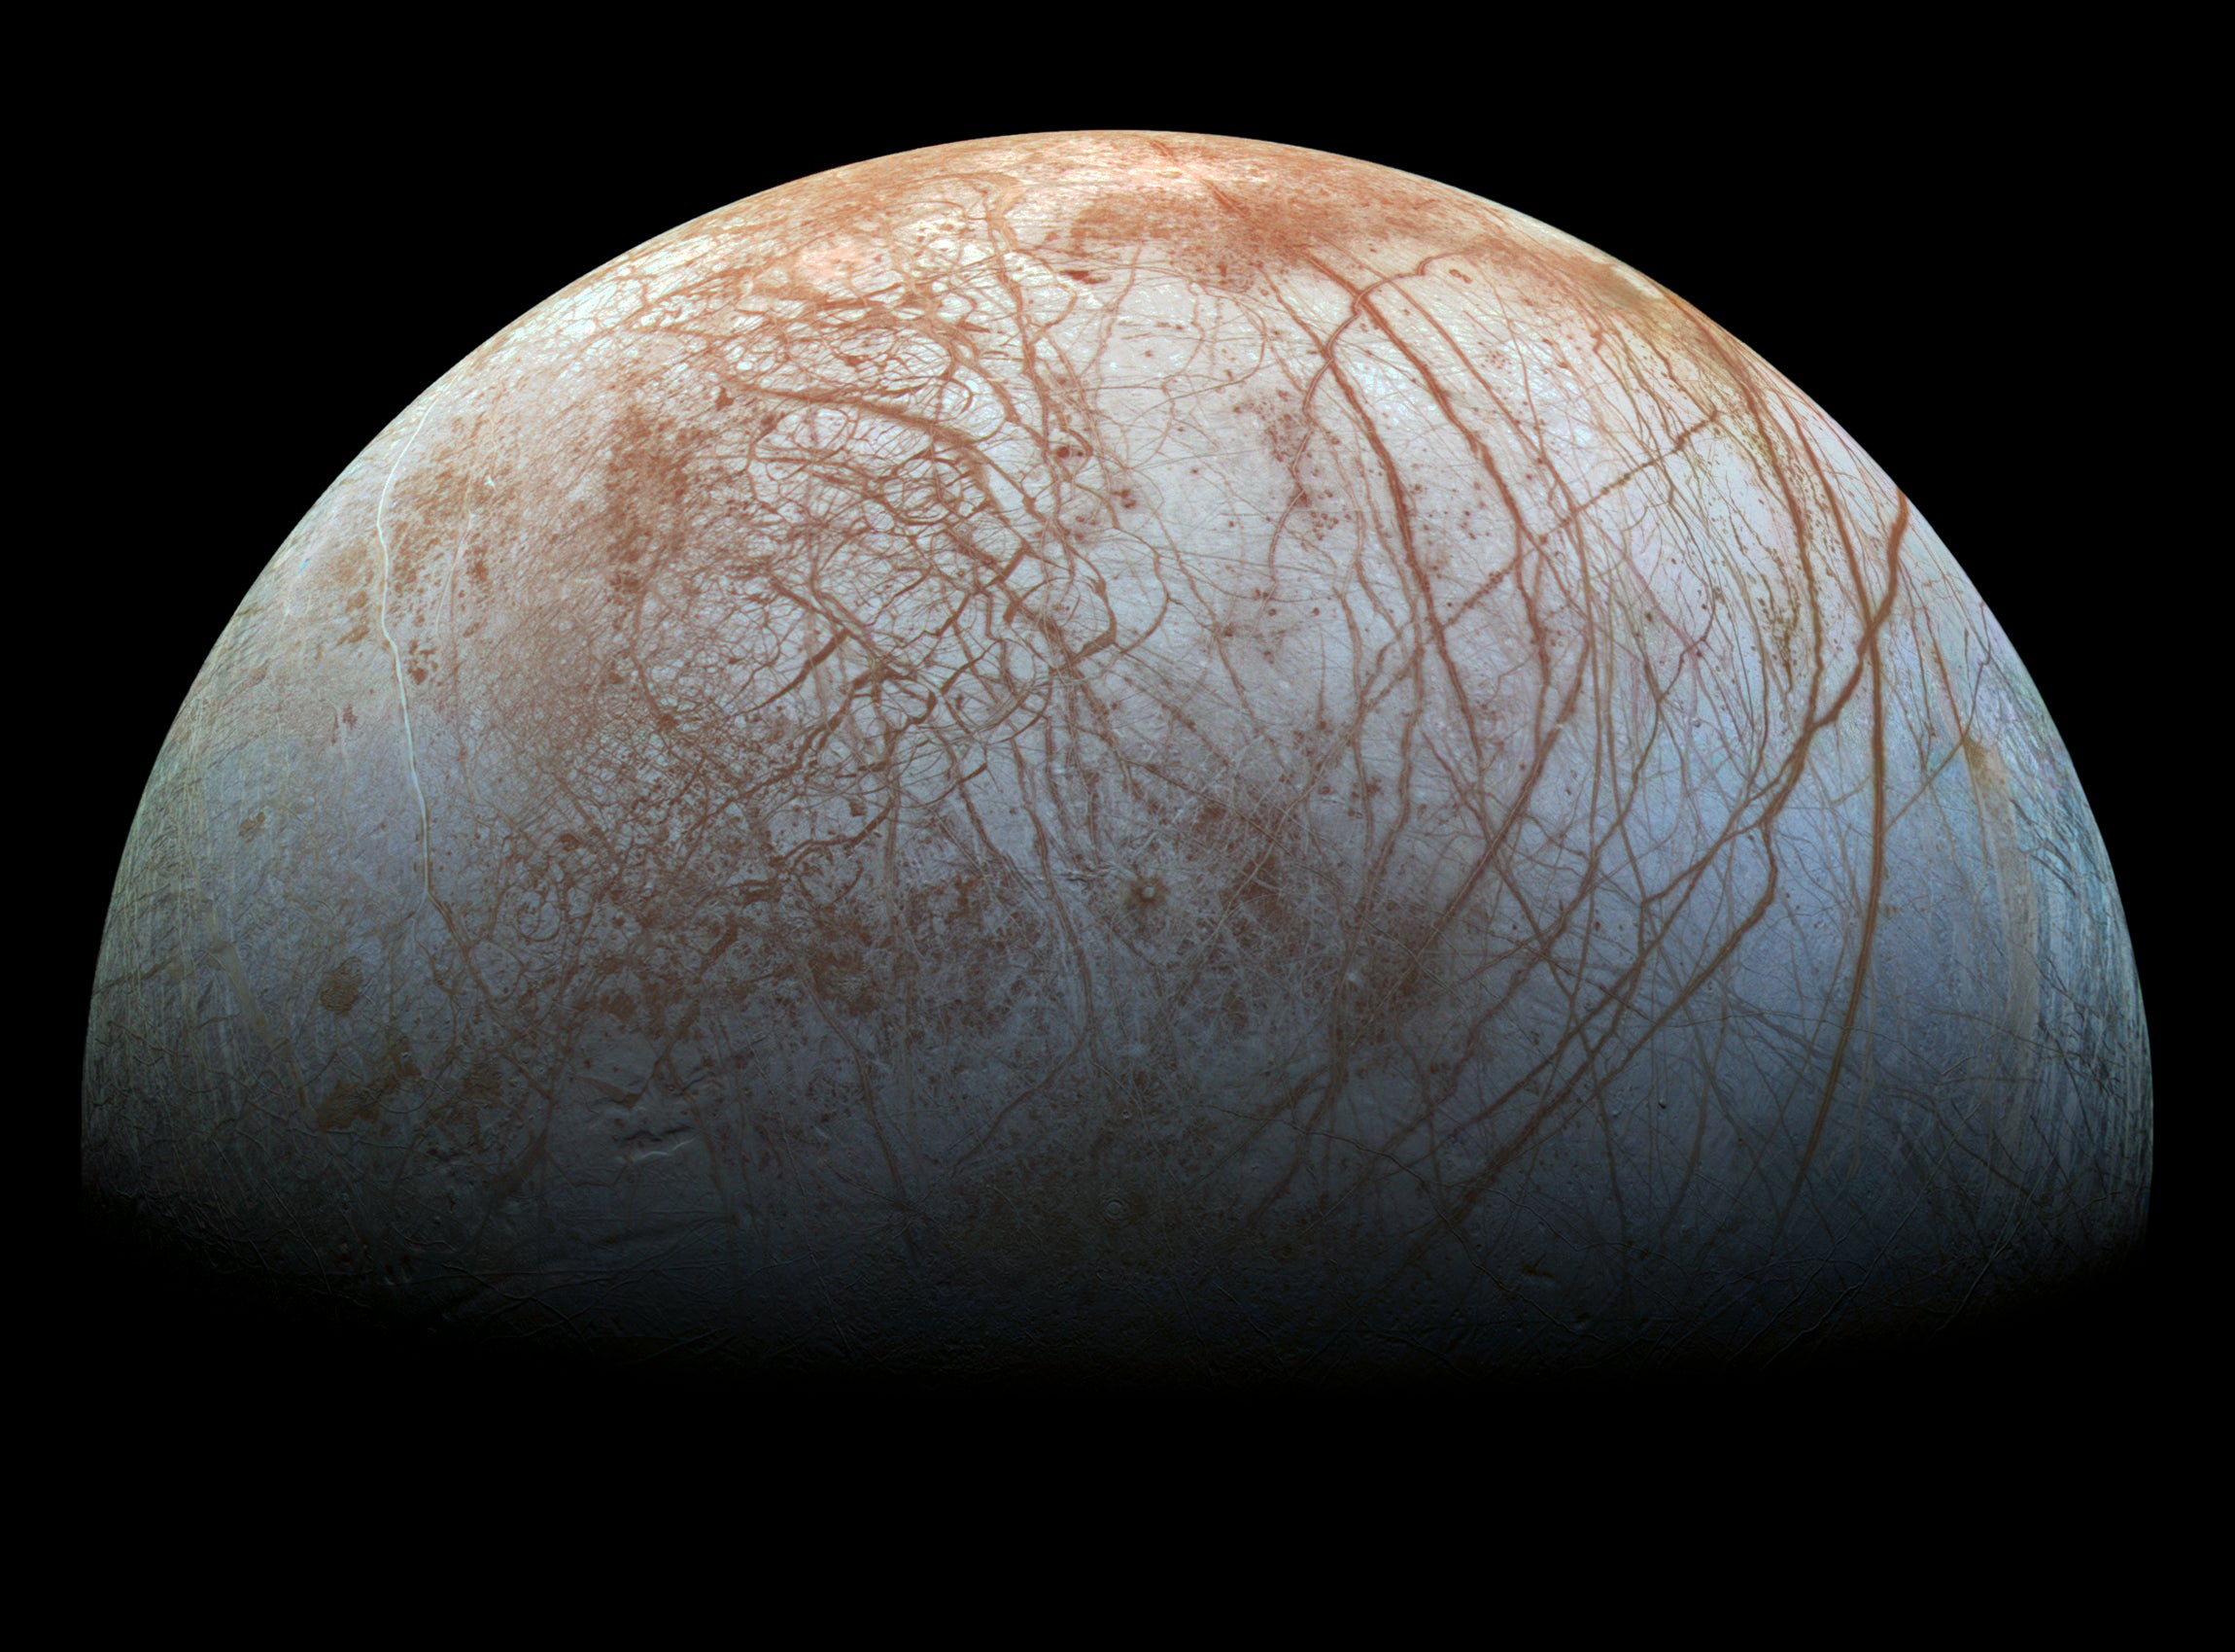 Ice-covered Europa, as imaged by the Galileo probe.  (Photo: NASA/JPL-Caltech/SETI Institute)